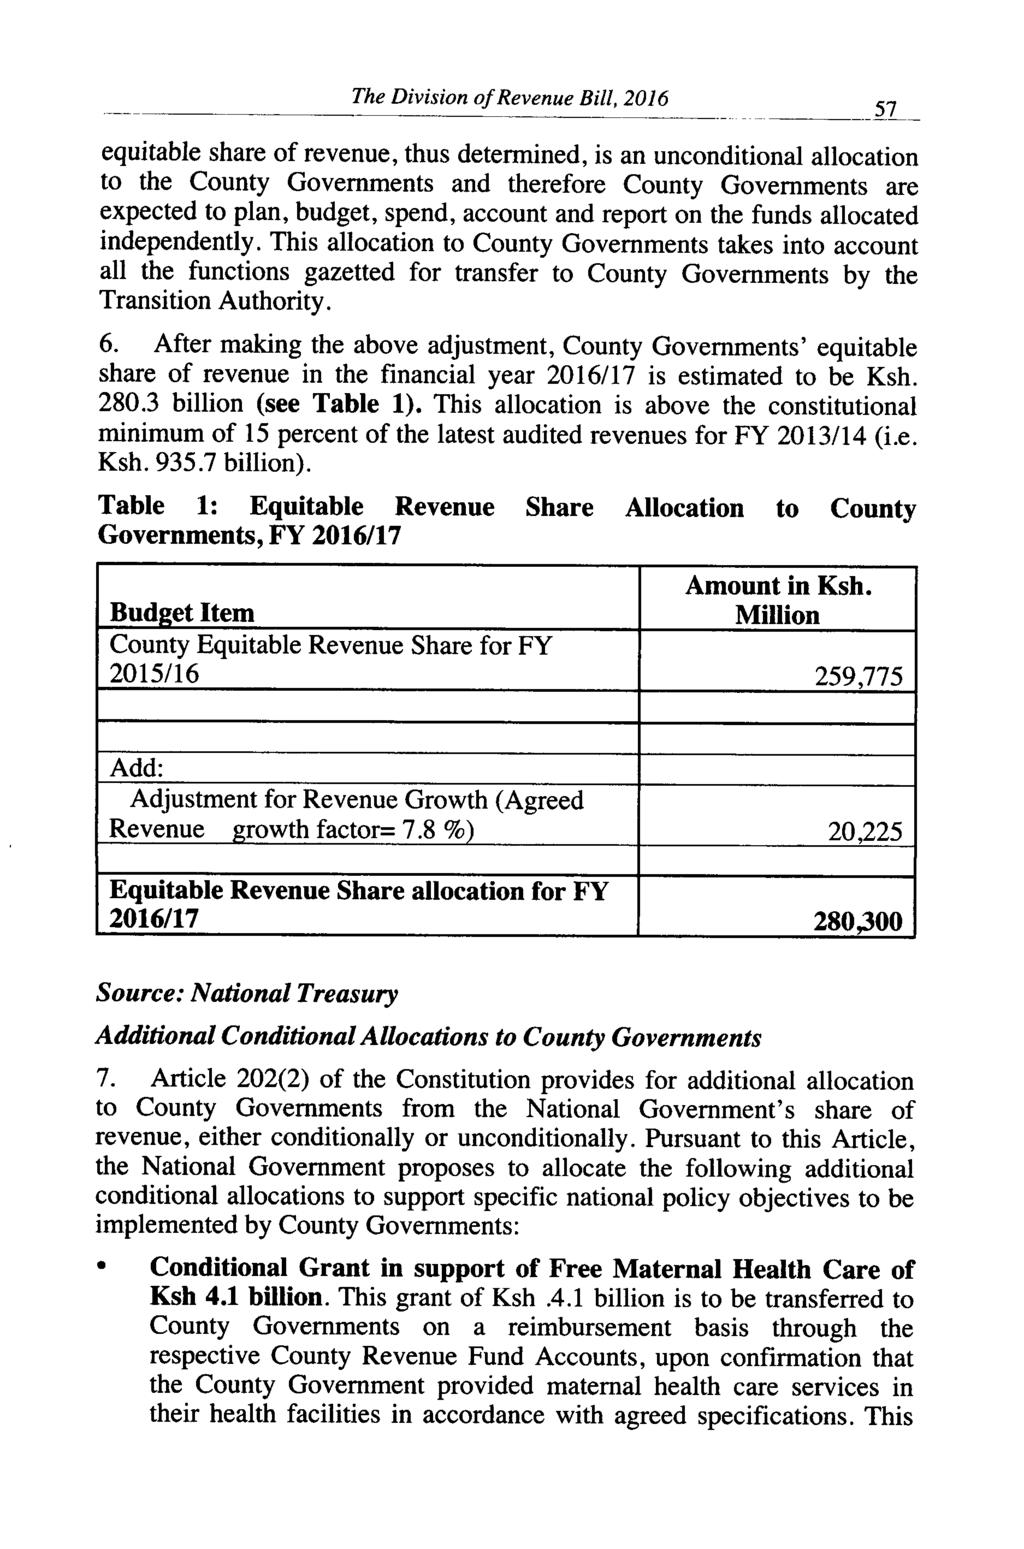 I------- The Division of Revenue Bill, 2016 equitable share of revenue, thus determined, is an unconditional allocation to the County Governments and therefore County Governments are expected to